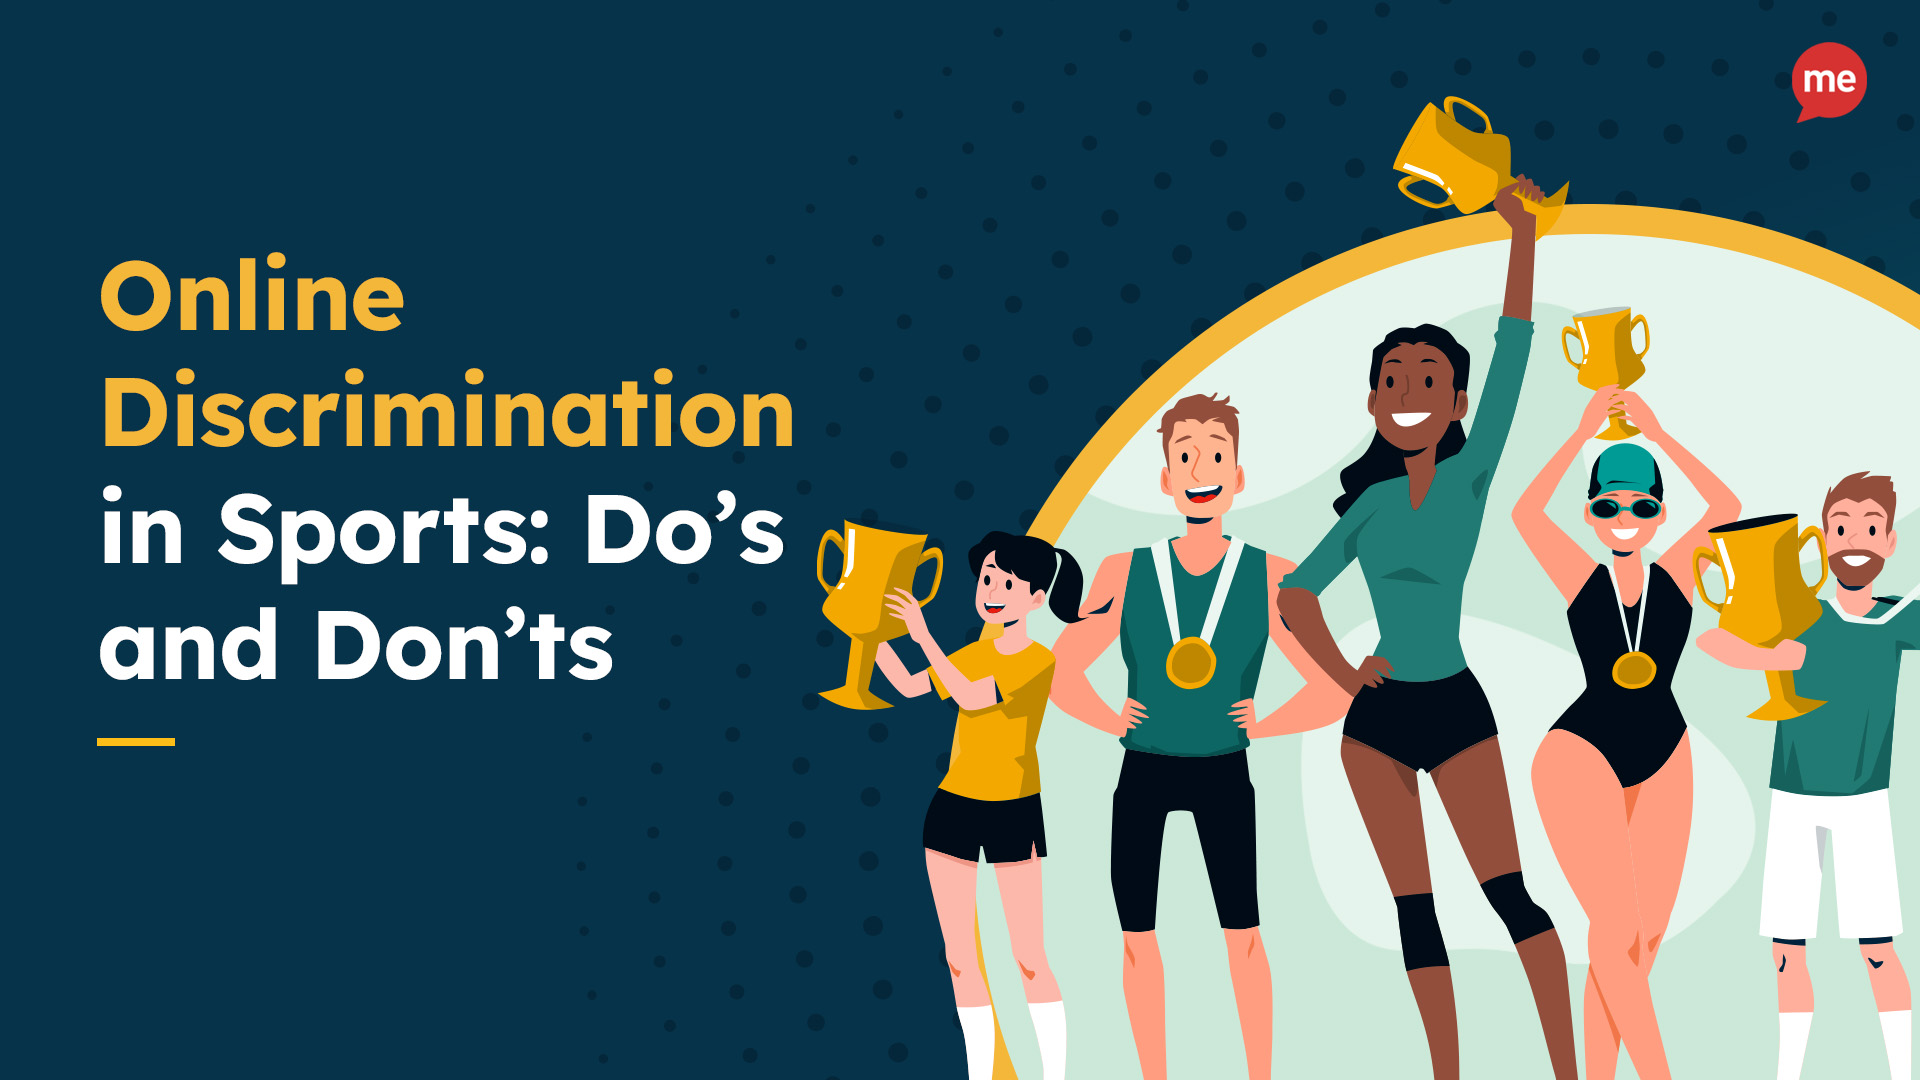 Online Discrimination in Sport: Dos and Don'ts with an image of athletes with trophies and medals